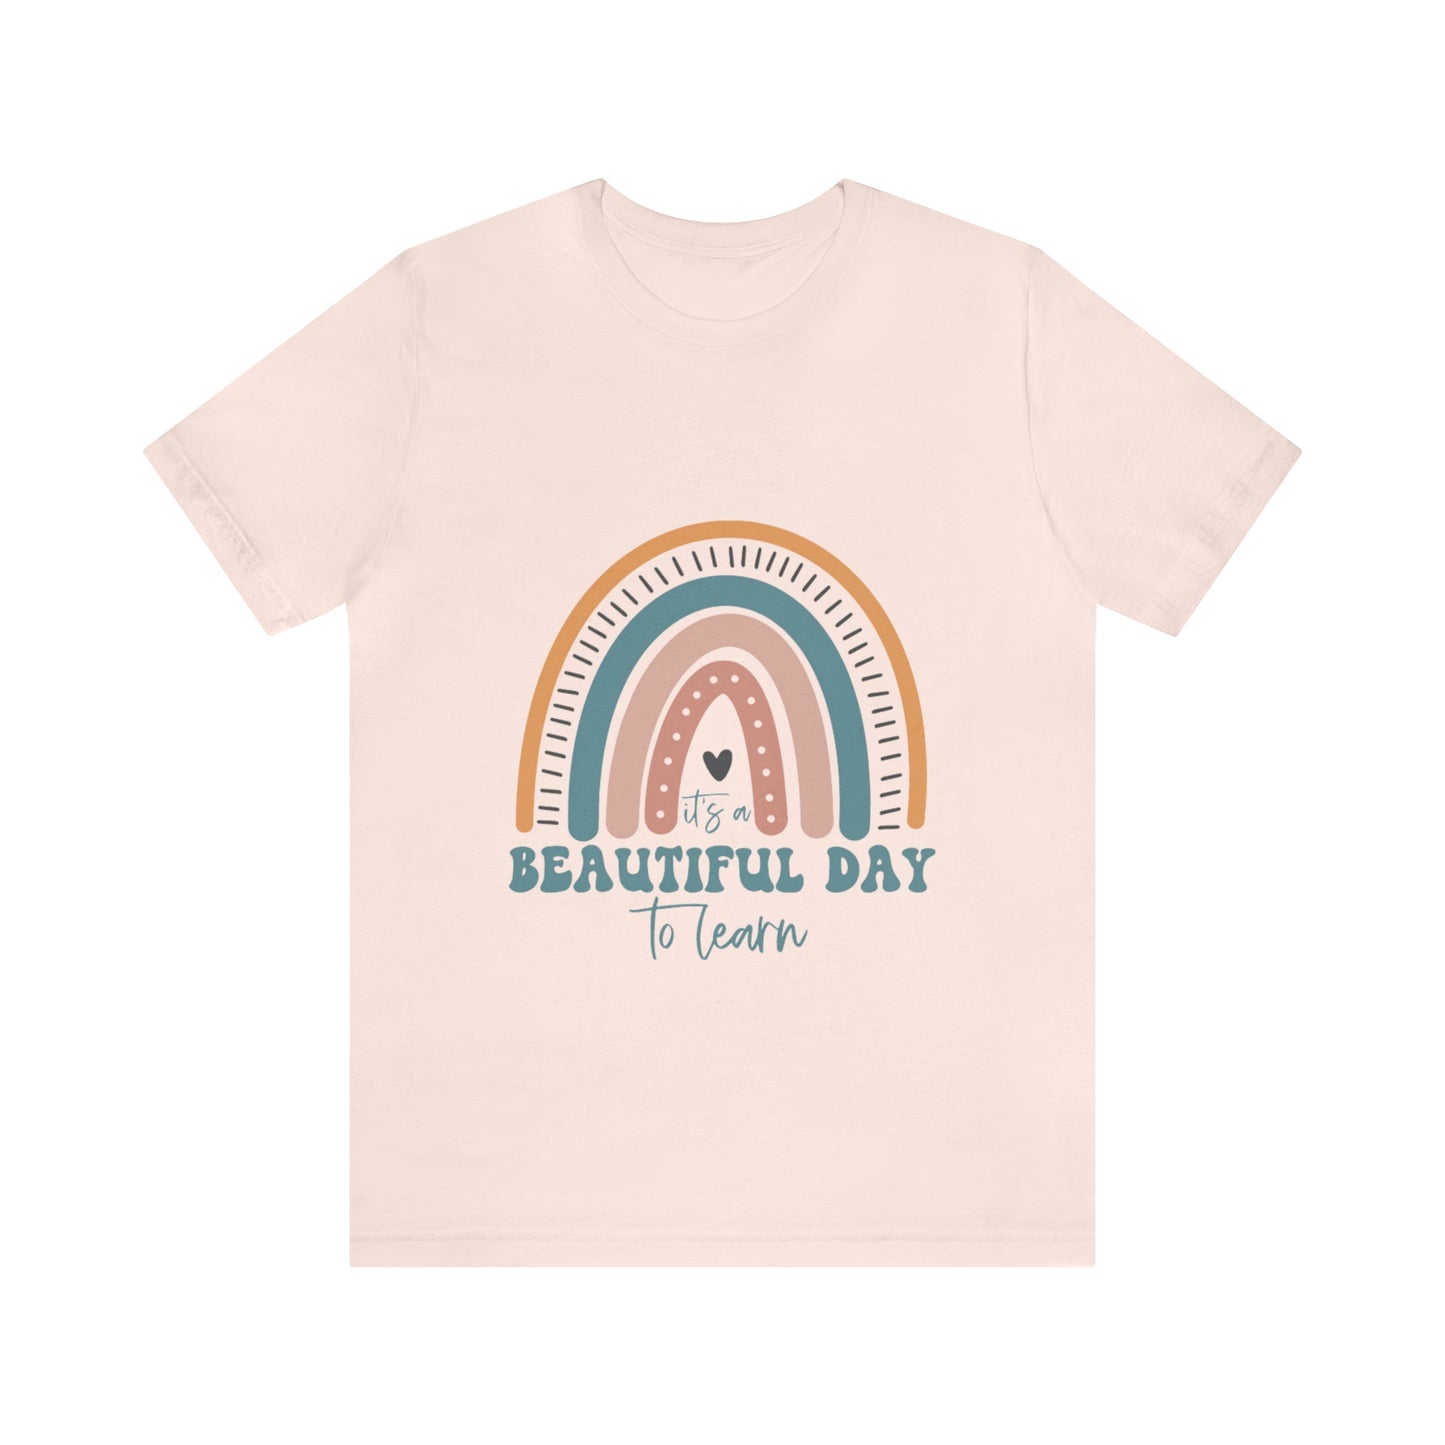 Retro rainbow "It's a beautiful day to learn" Unisex Tee